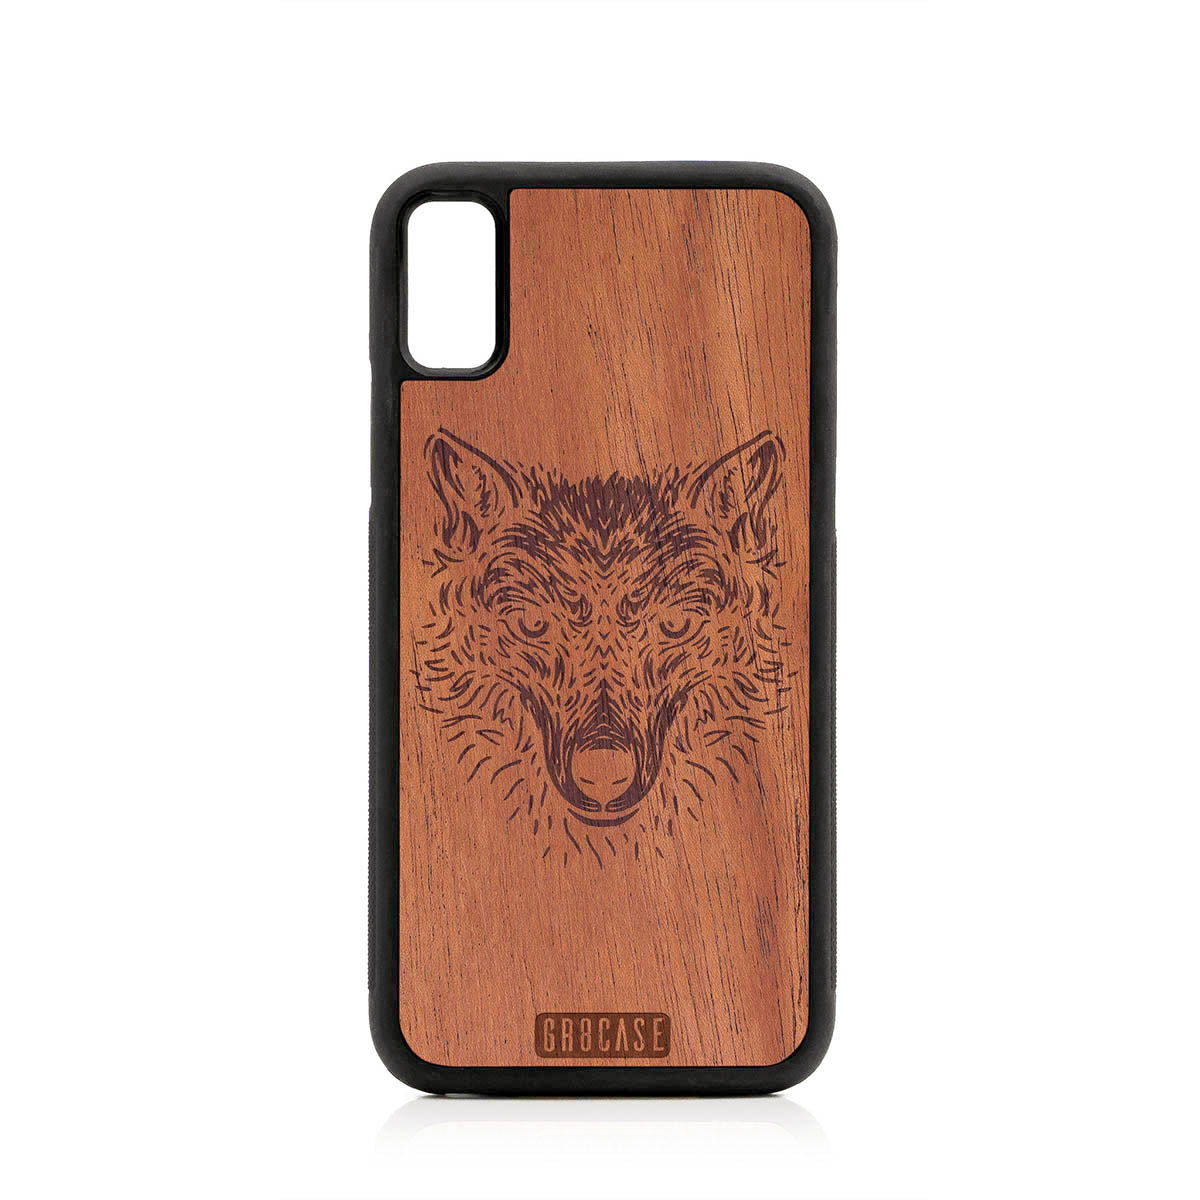 Furry Wolf Design Wood Case For iPhone XR